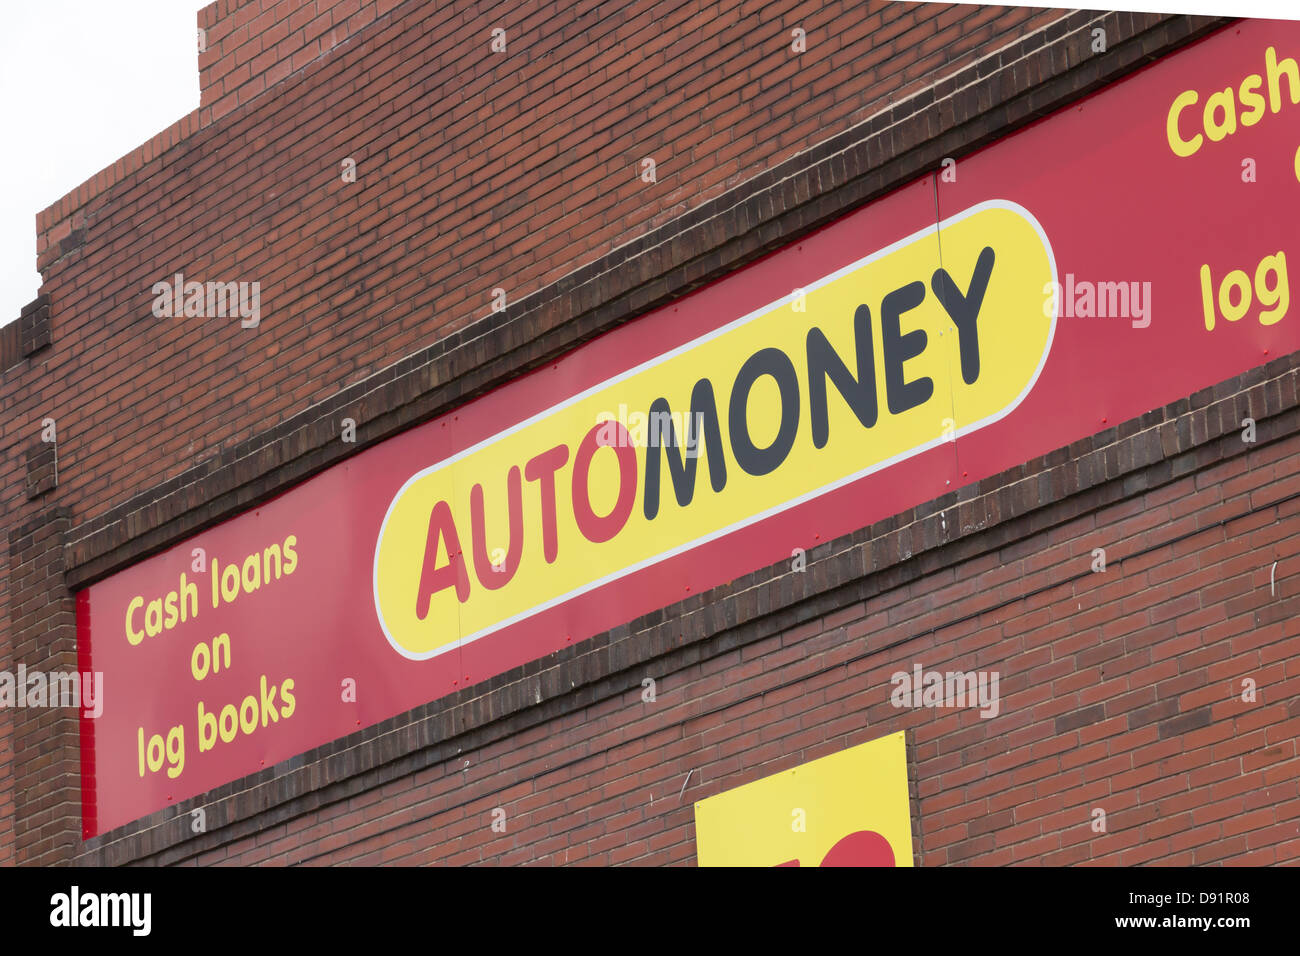 AutoMoney office in Bolton. Automoney are a short term cash loan specialist using the borrowers car logbook as security. Stock Photo